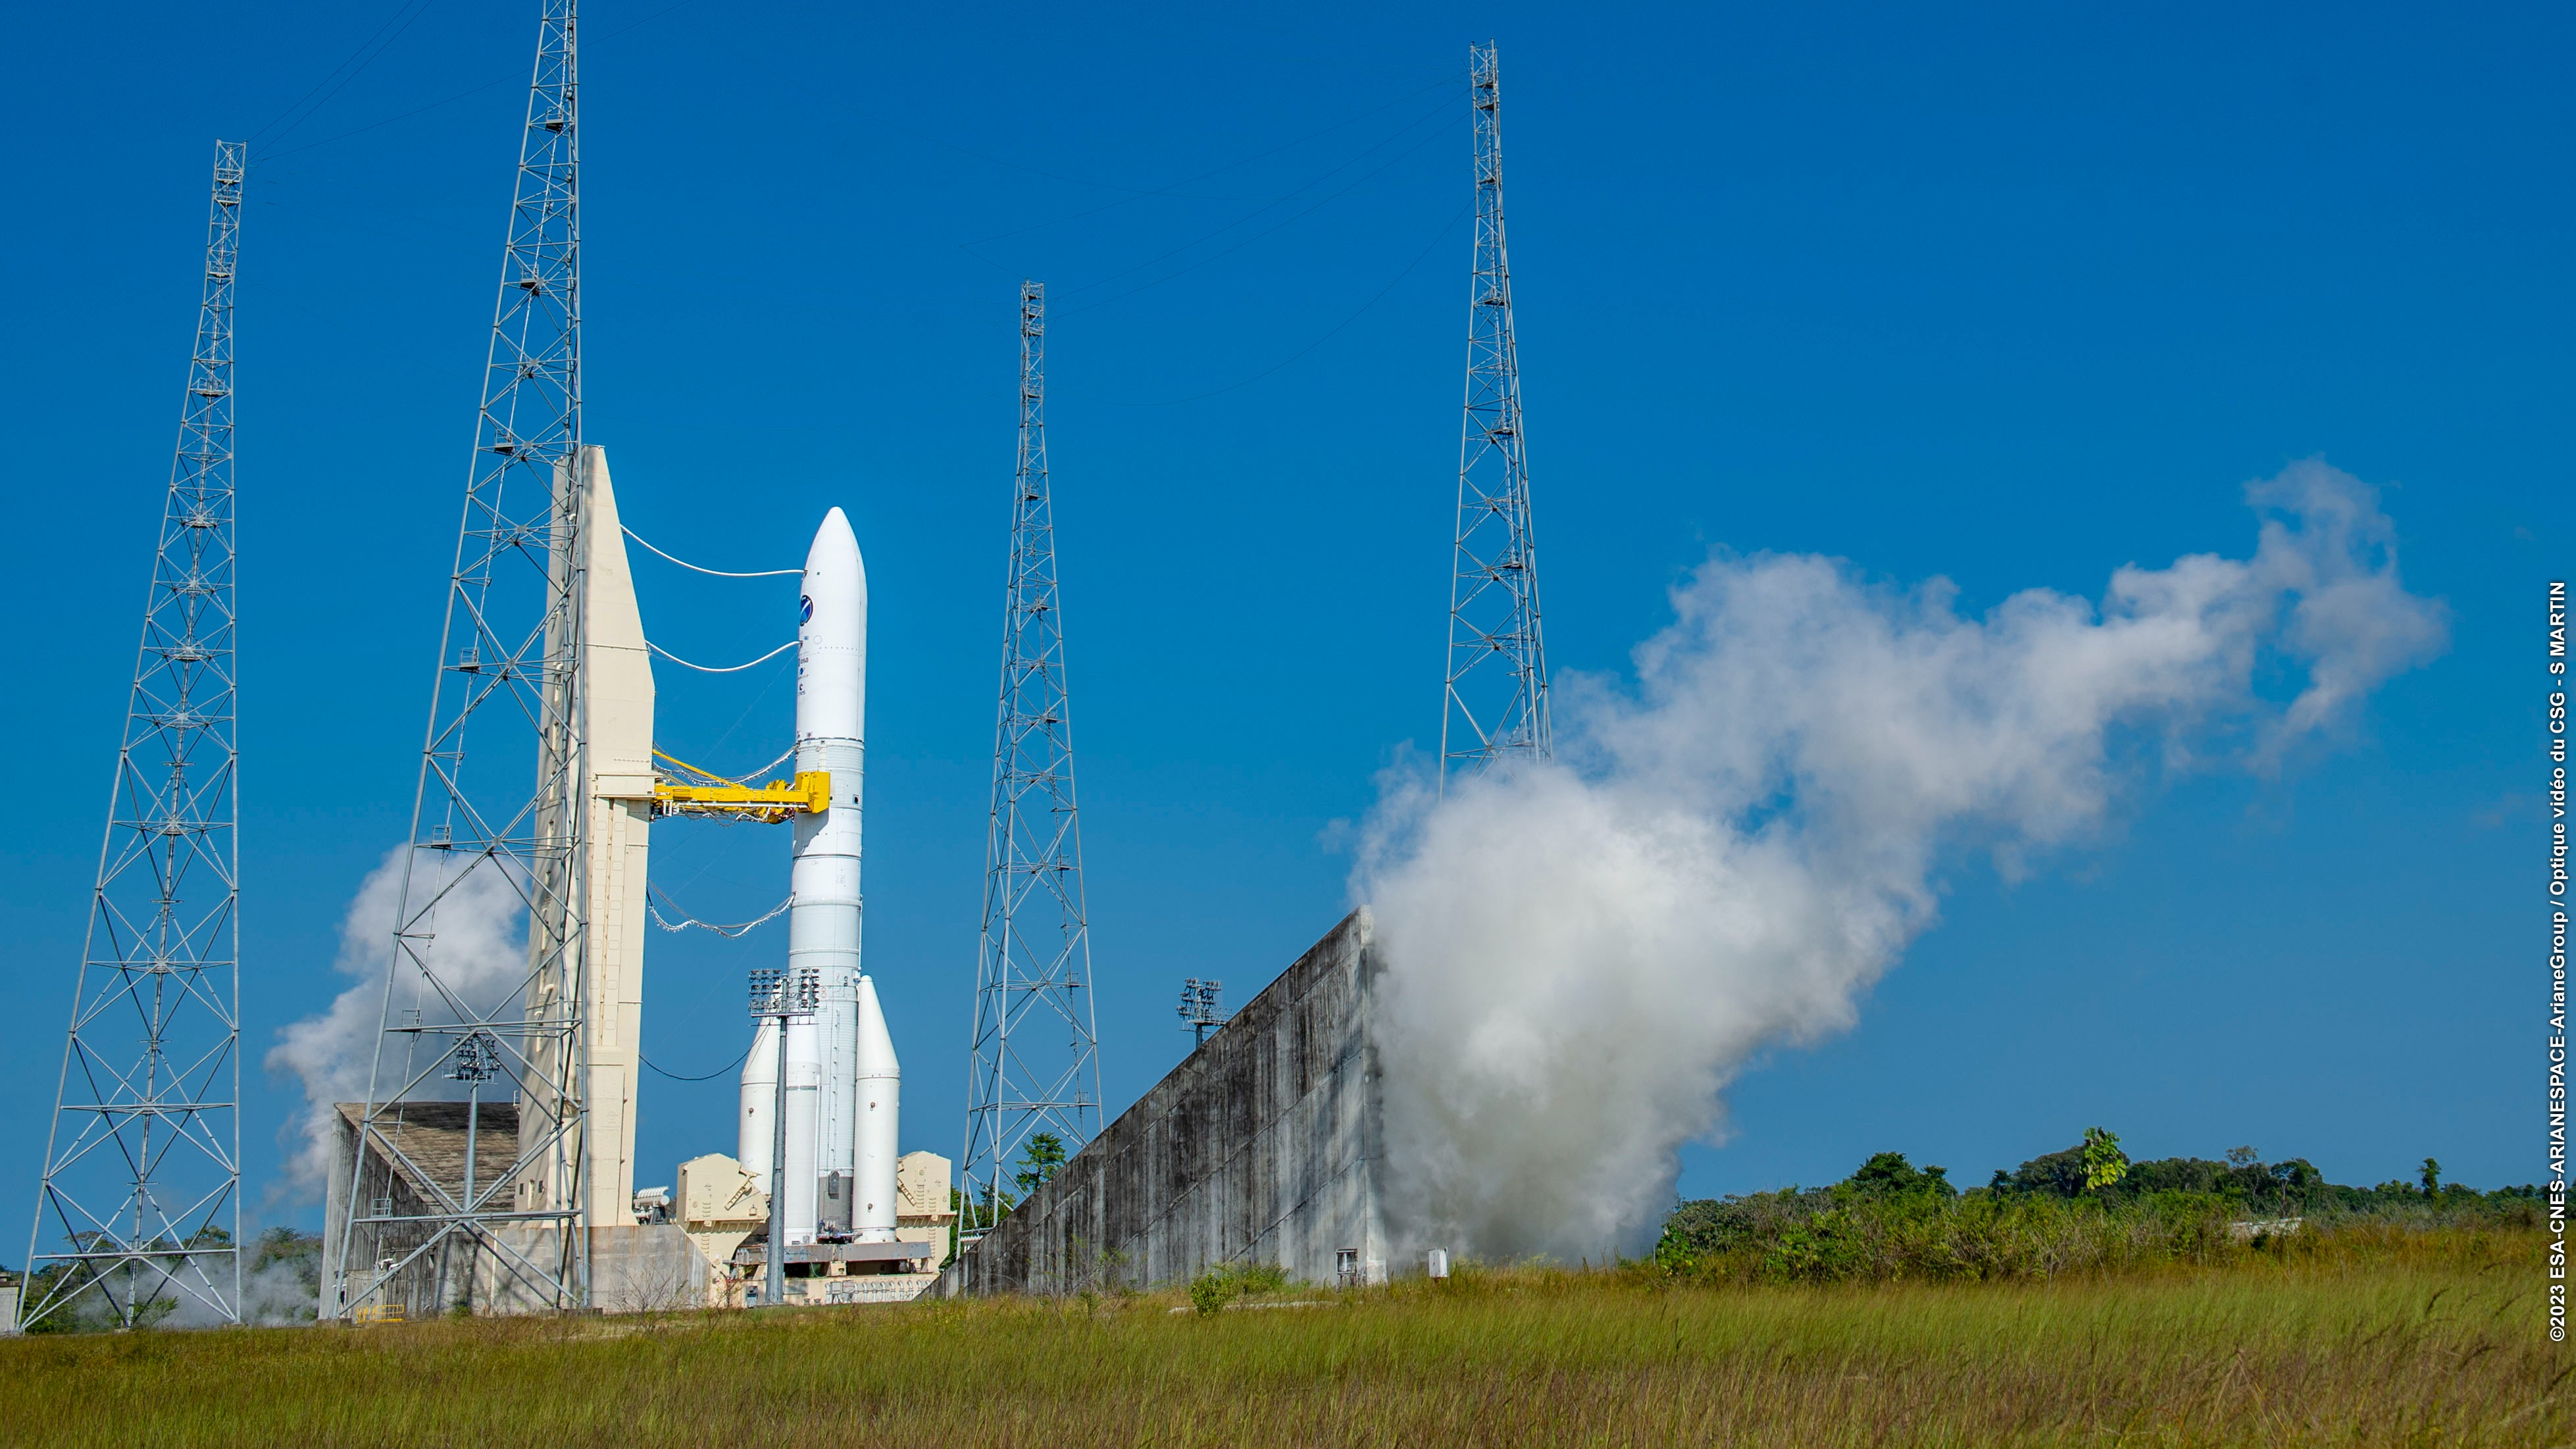 Watch Europe’s new Ariane 6 rocket fire its engines in new timelapse video Space